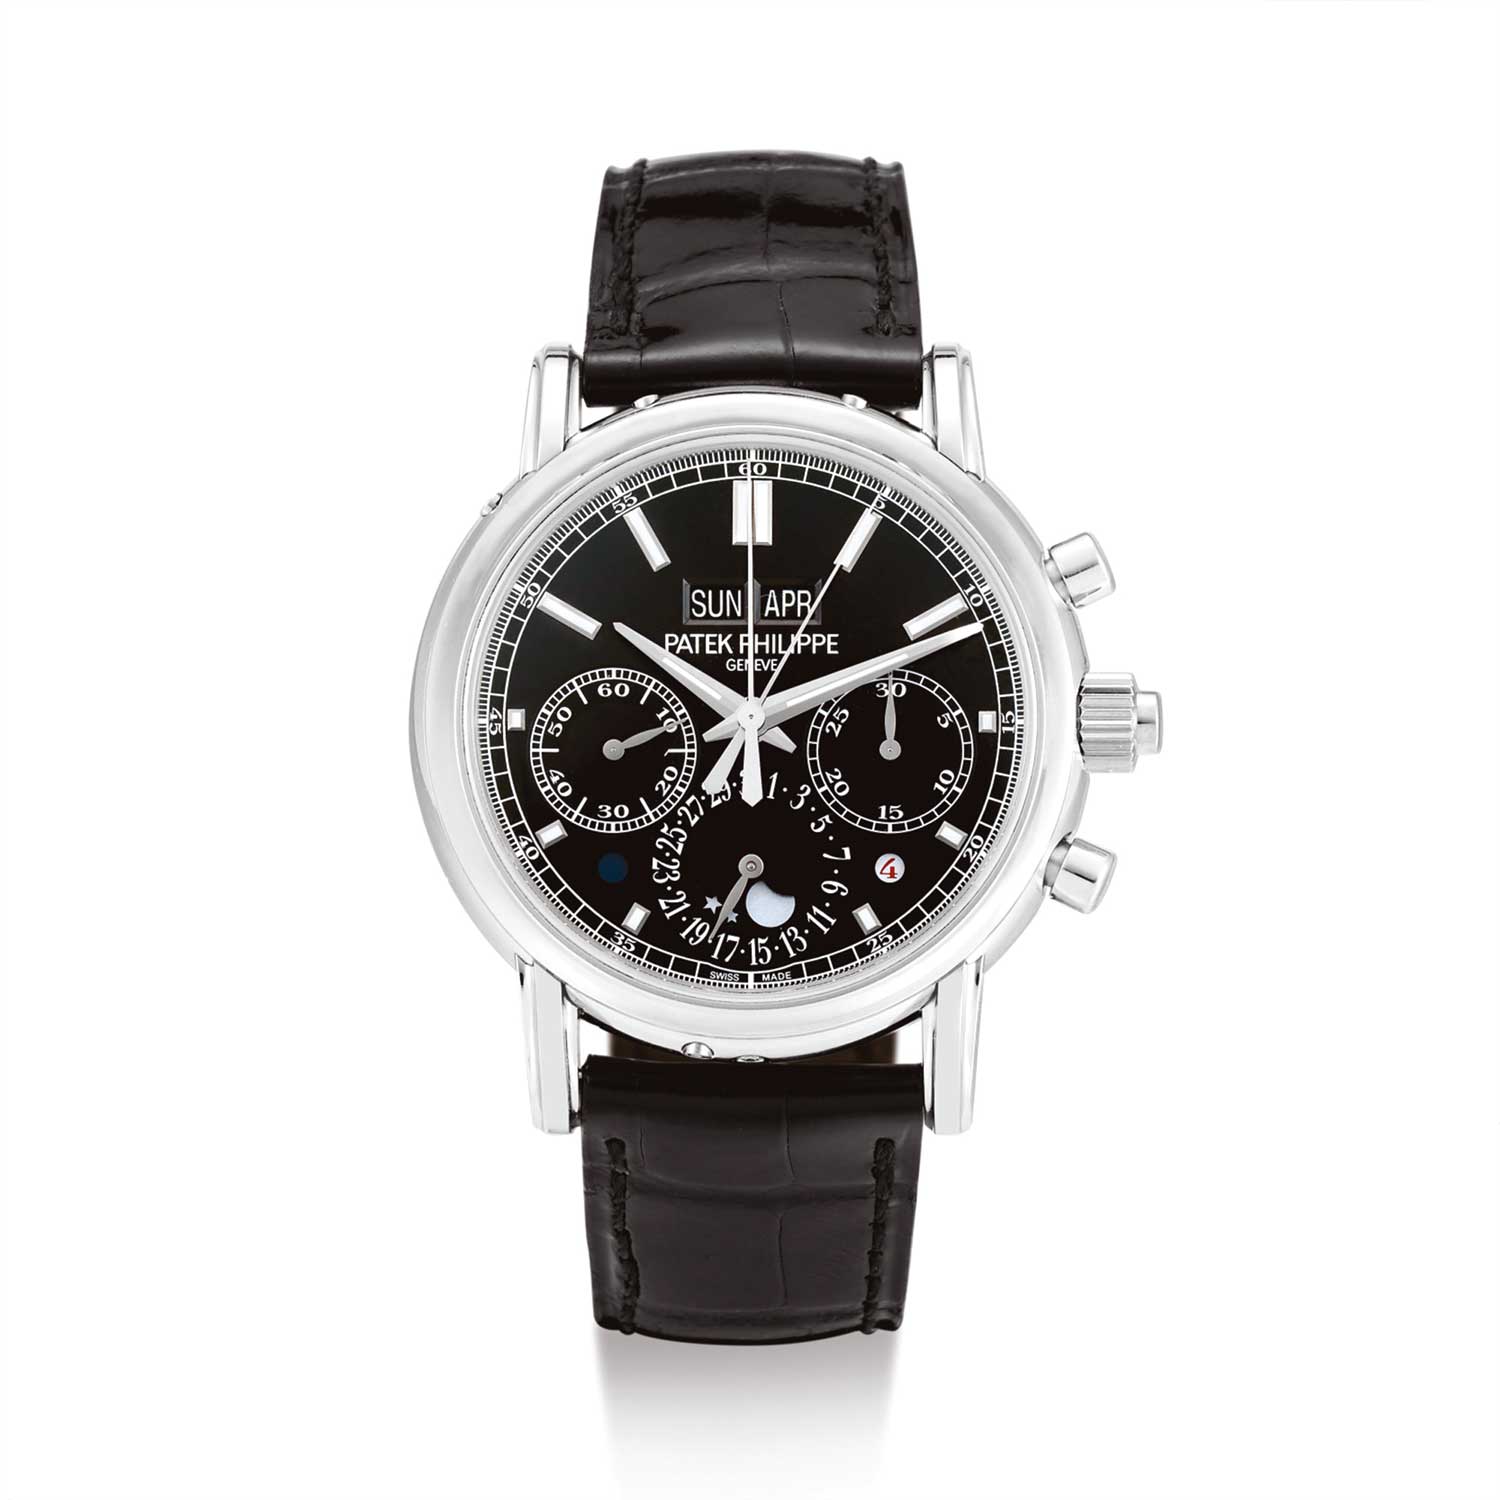 The Patek Philippe Split Second Perpetual Calendar Chronograph Ref. 5204P-011 in platinum with the black dial, launched in 2014 (Image: Sothebys.com)